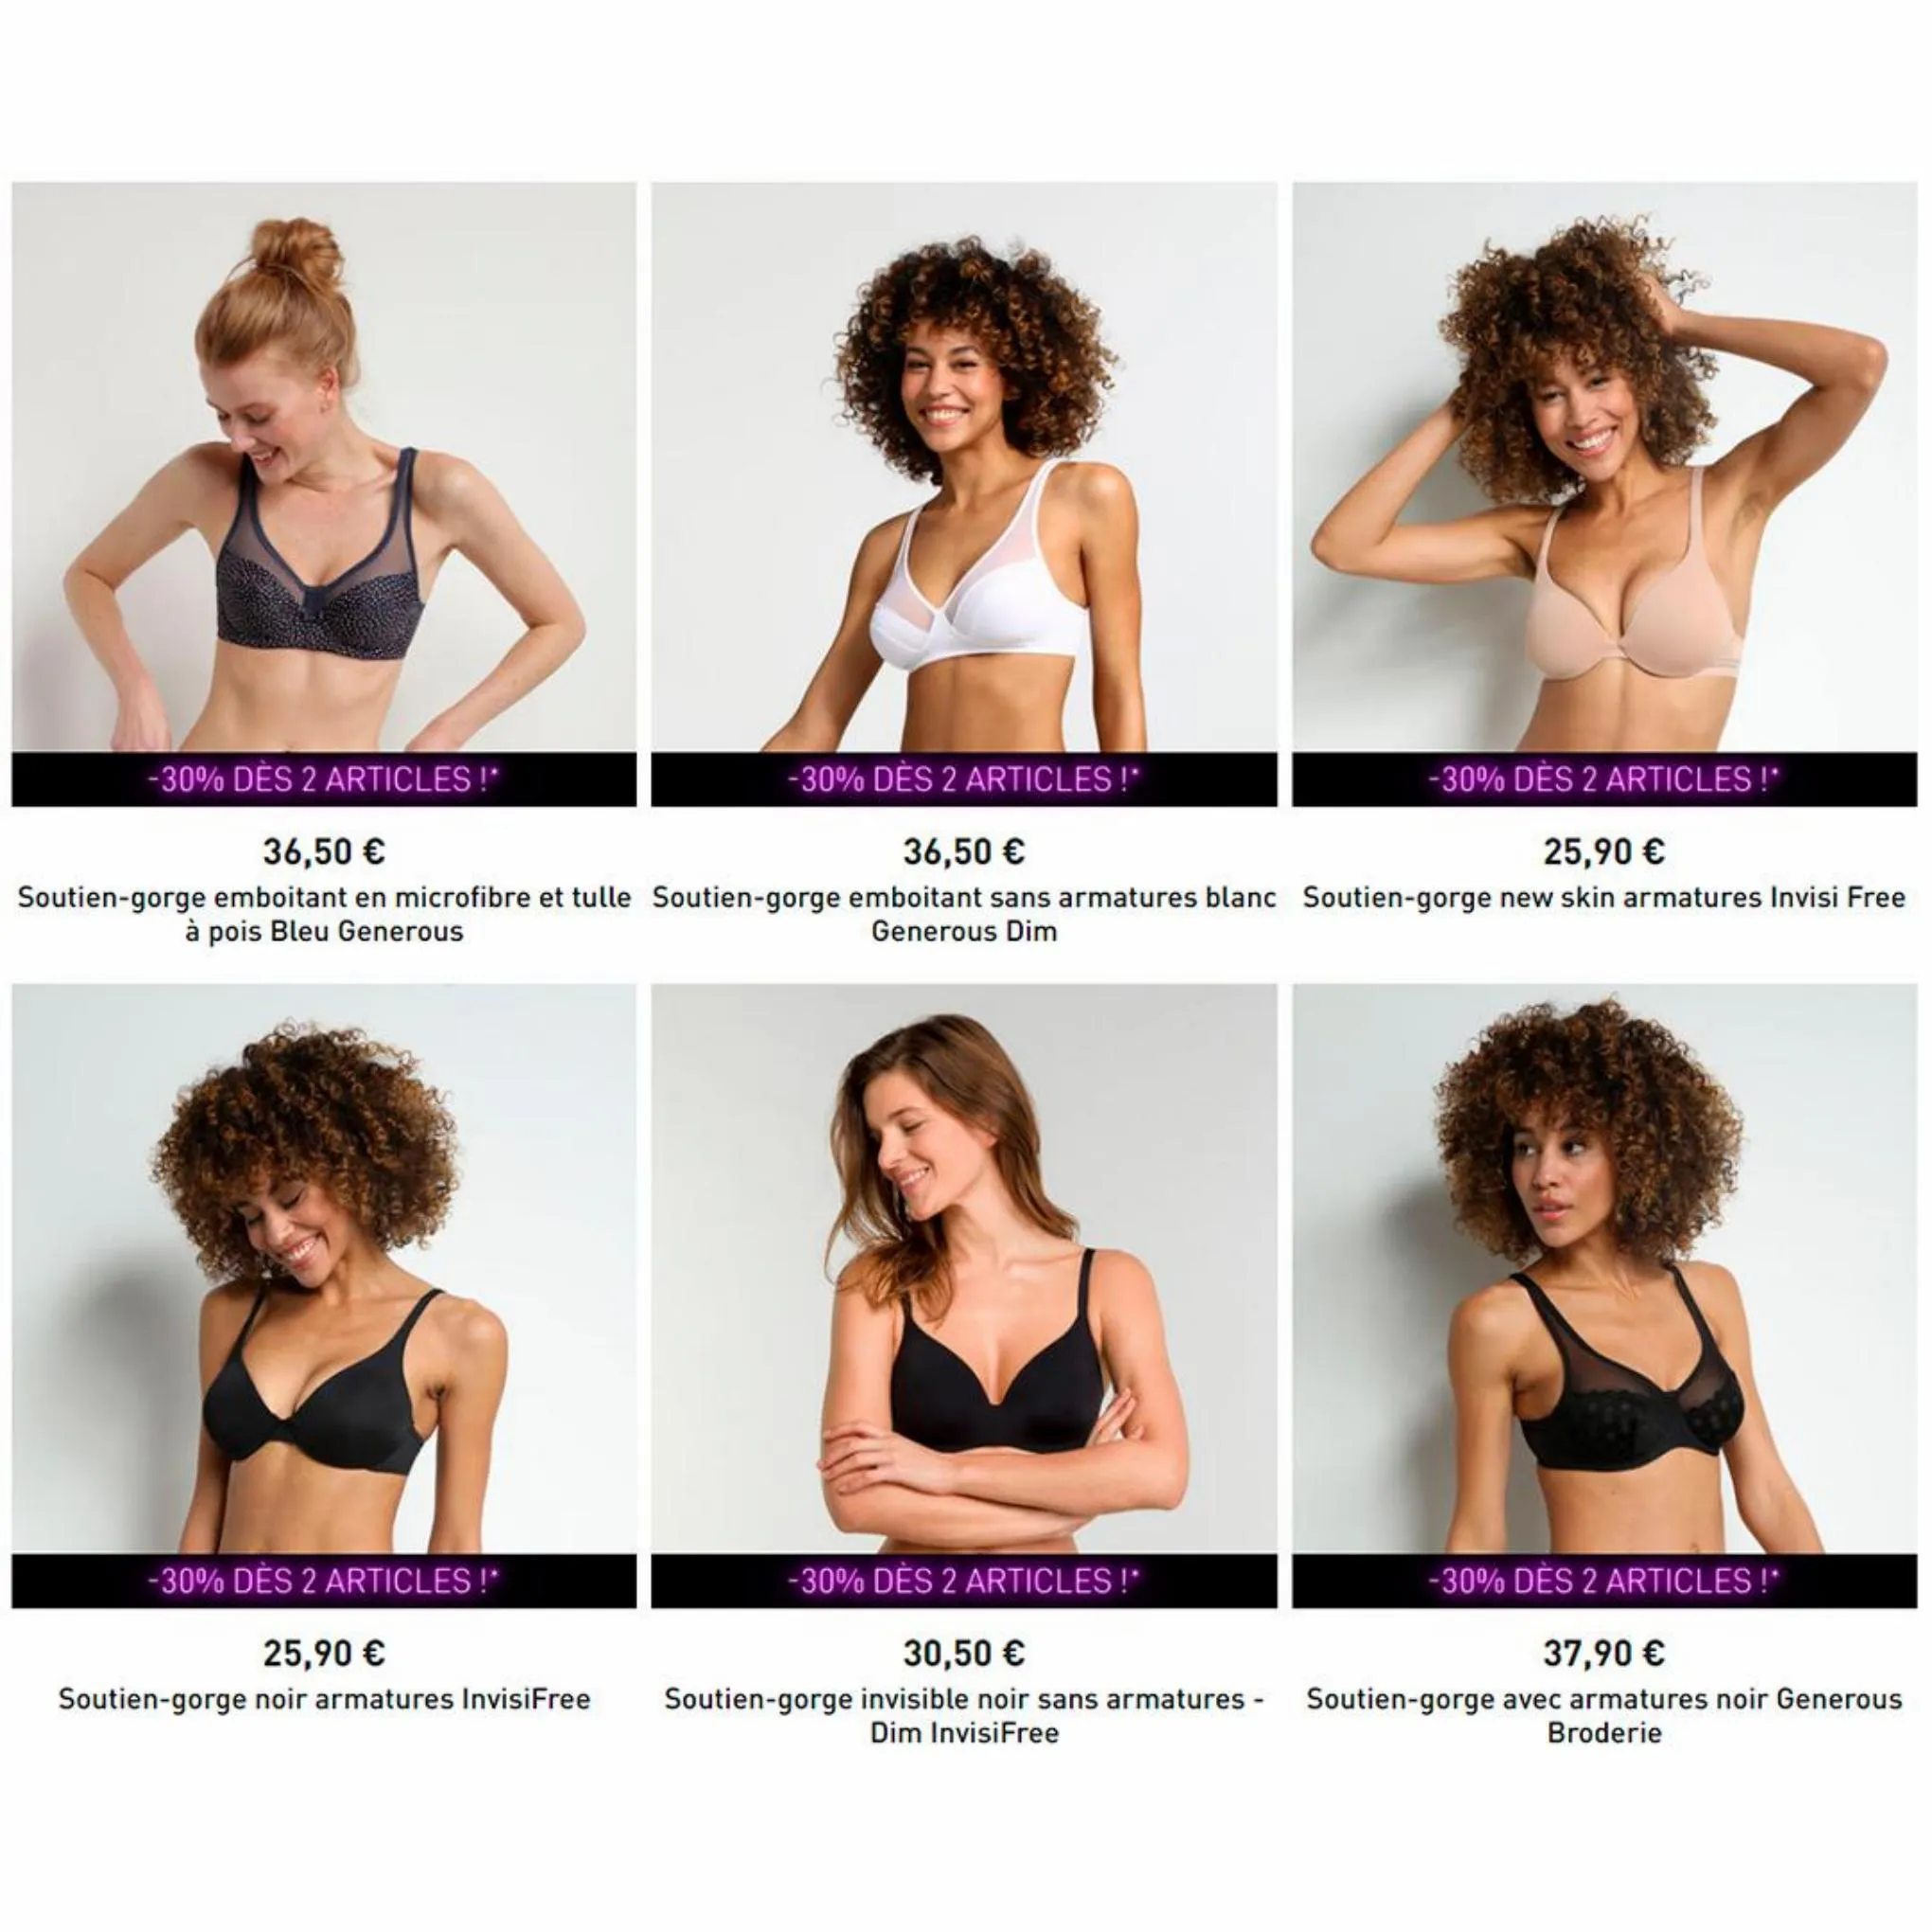 Catalogue Black Friday Lingerie, page 00010